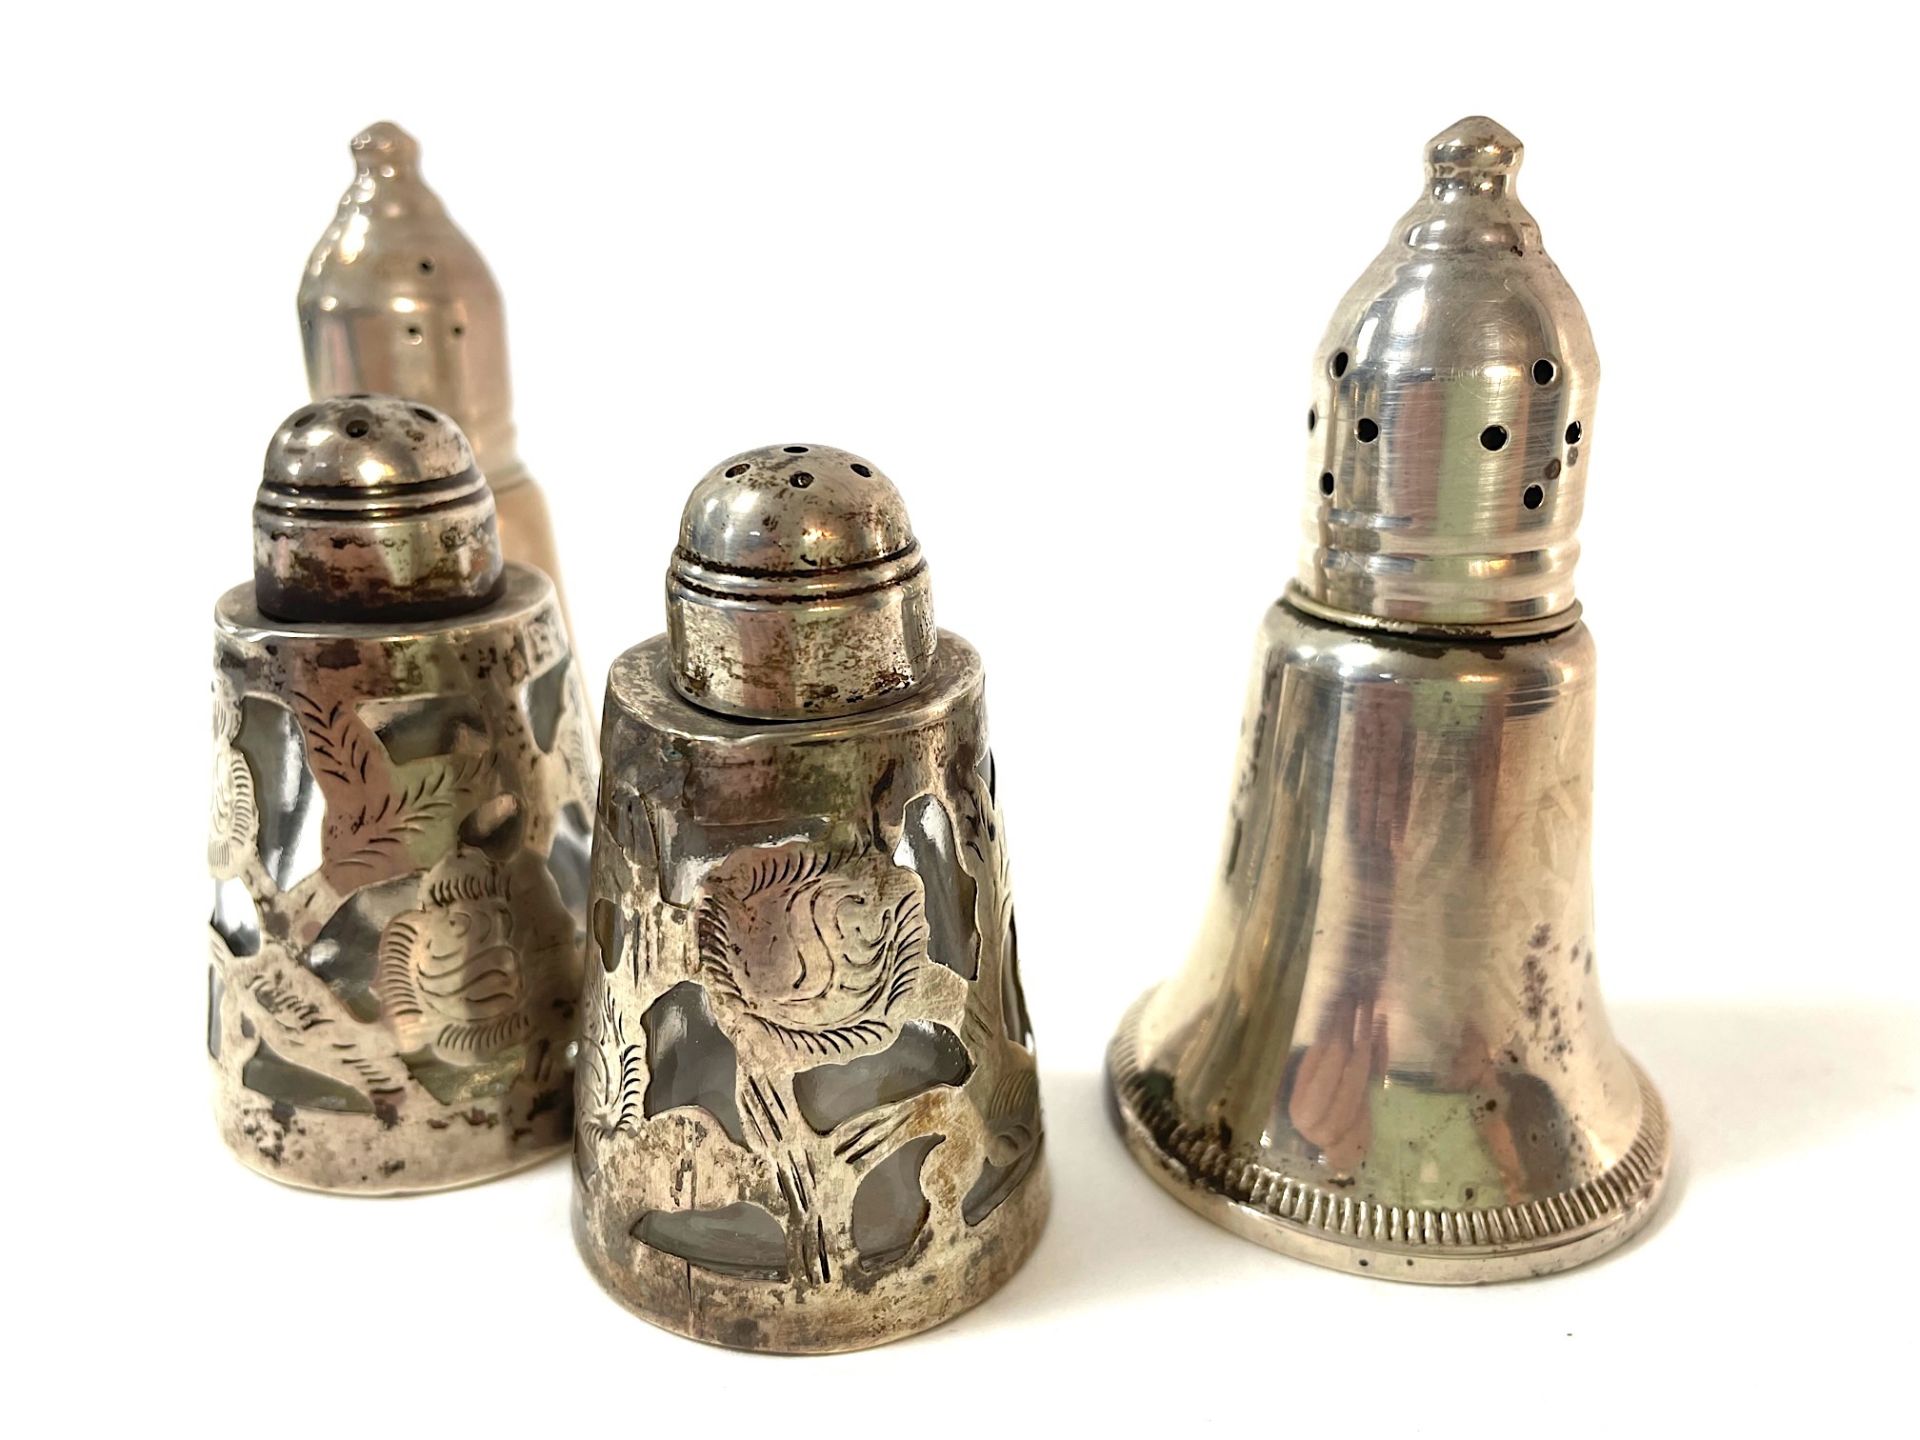 40 pairs of salt/pepper and spice shakers, - Image 74 of 88